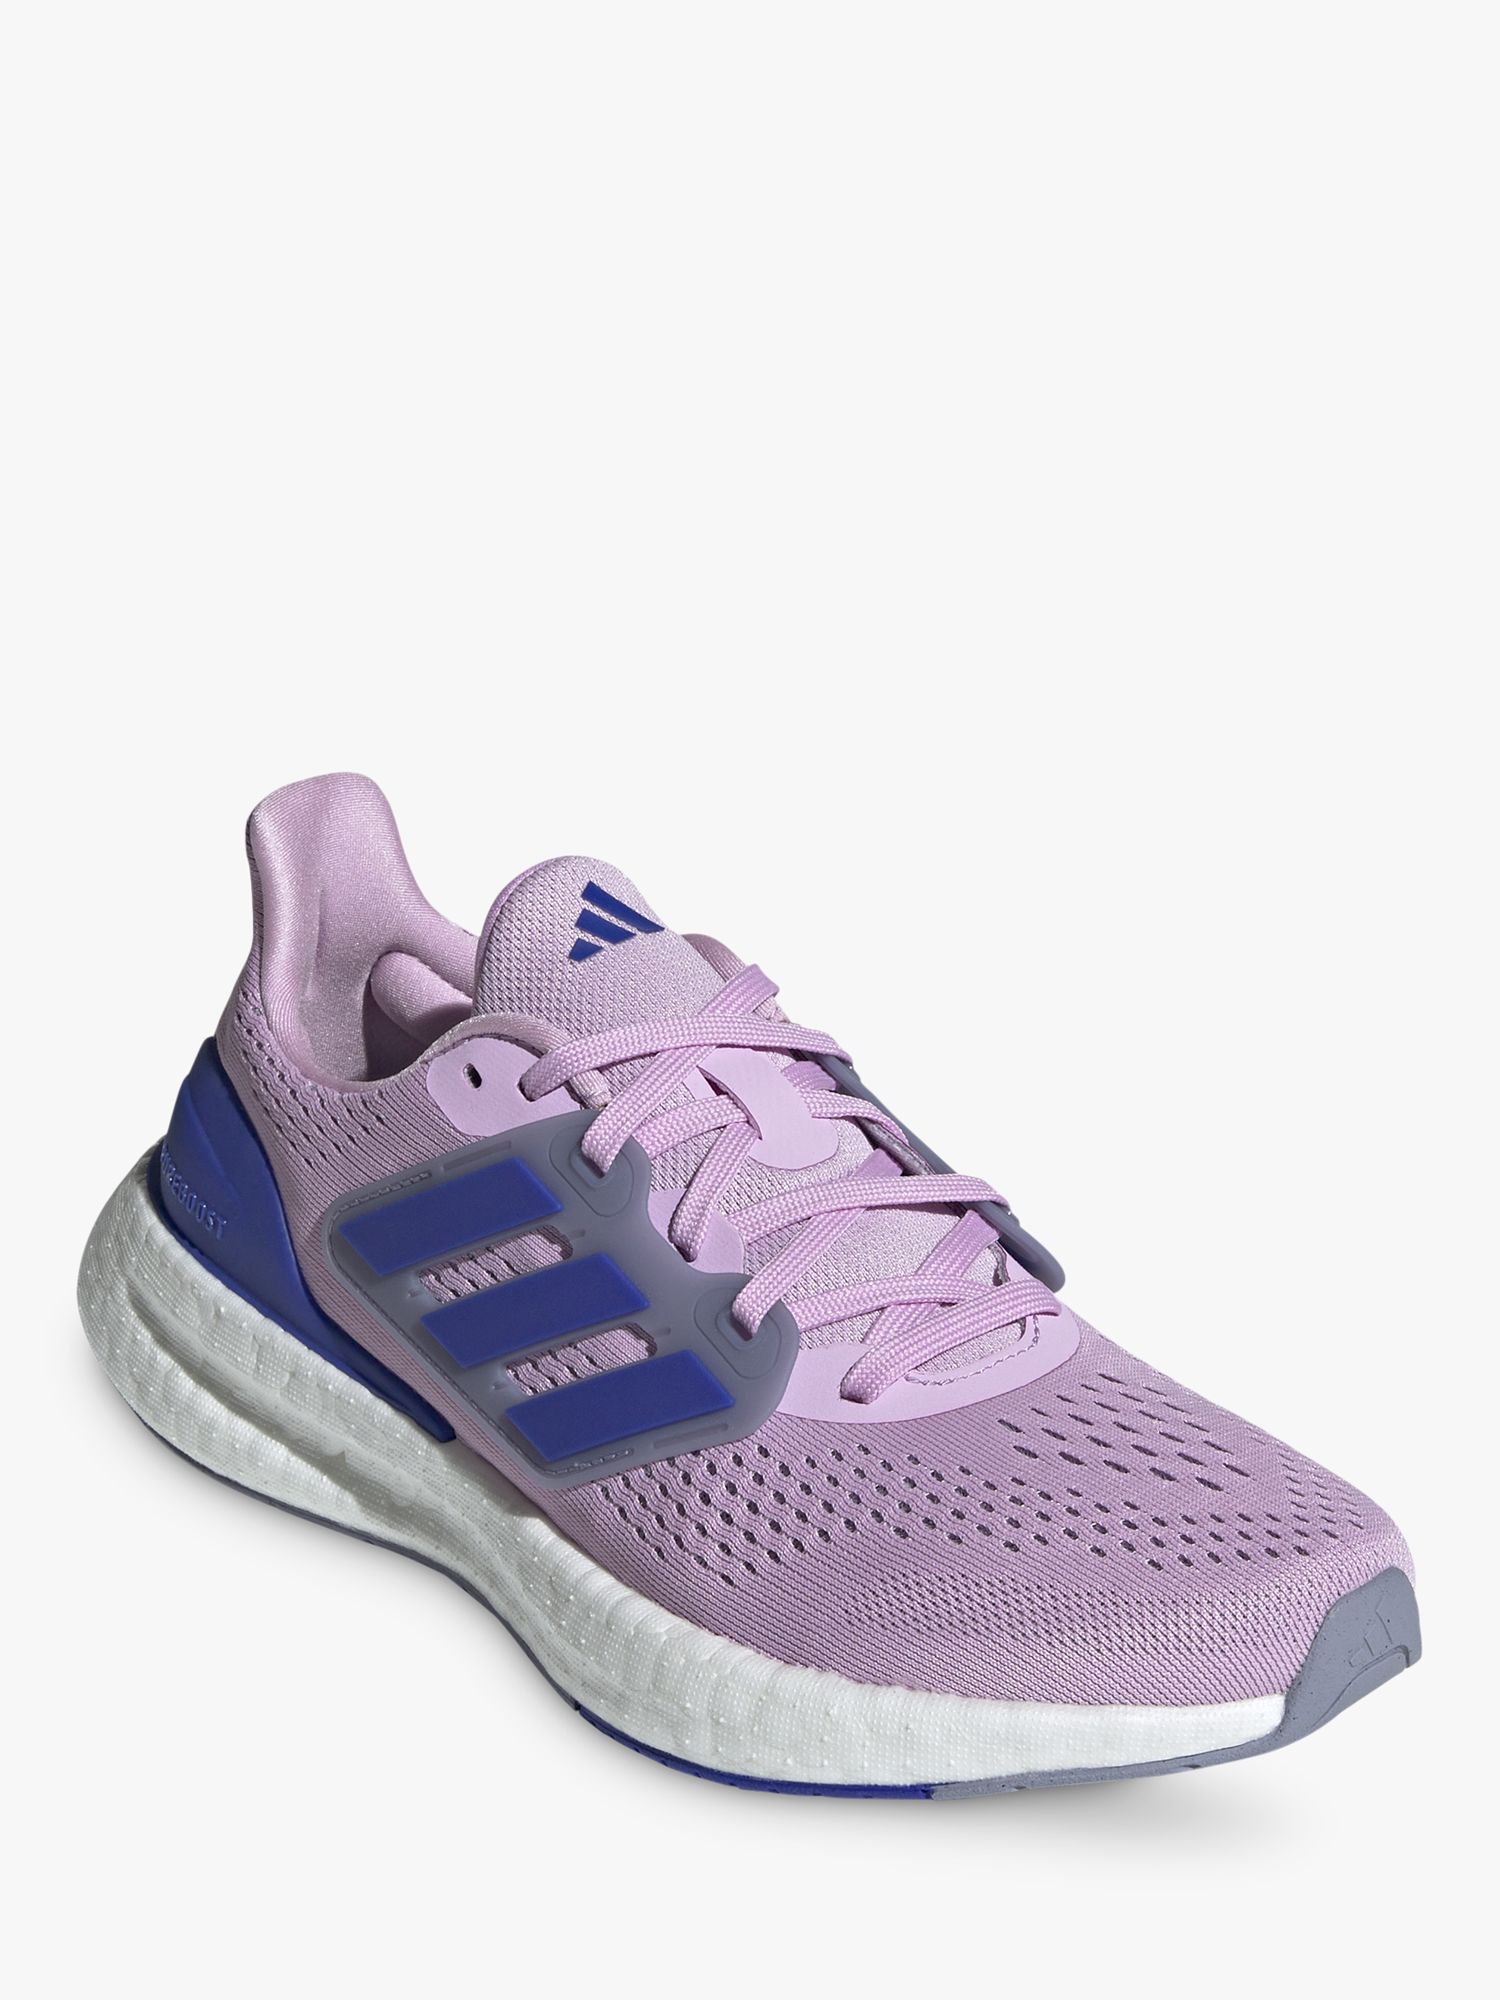 adidas Pureboost 23 Running Shoes, Lilac/Blue/Silver, 4